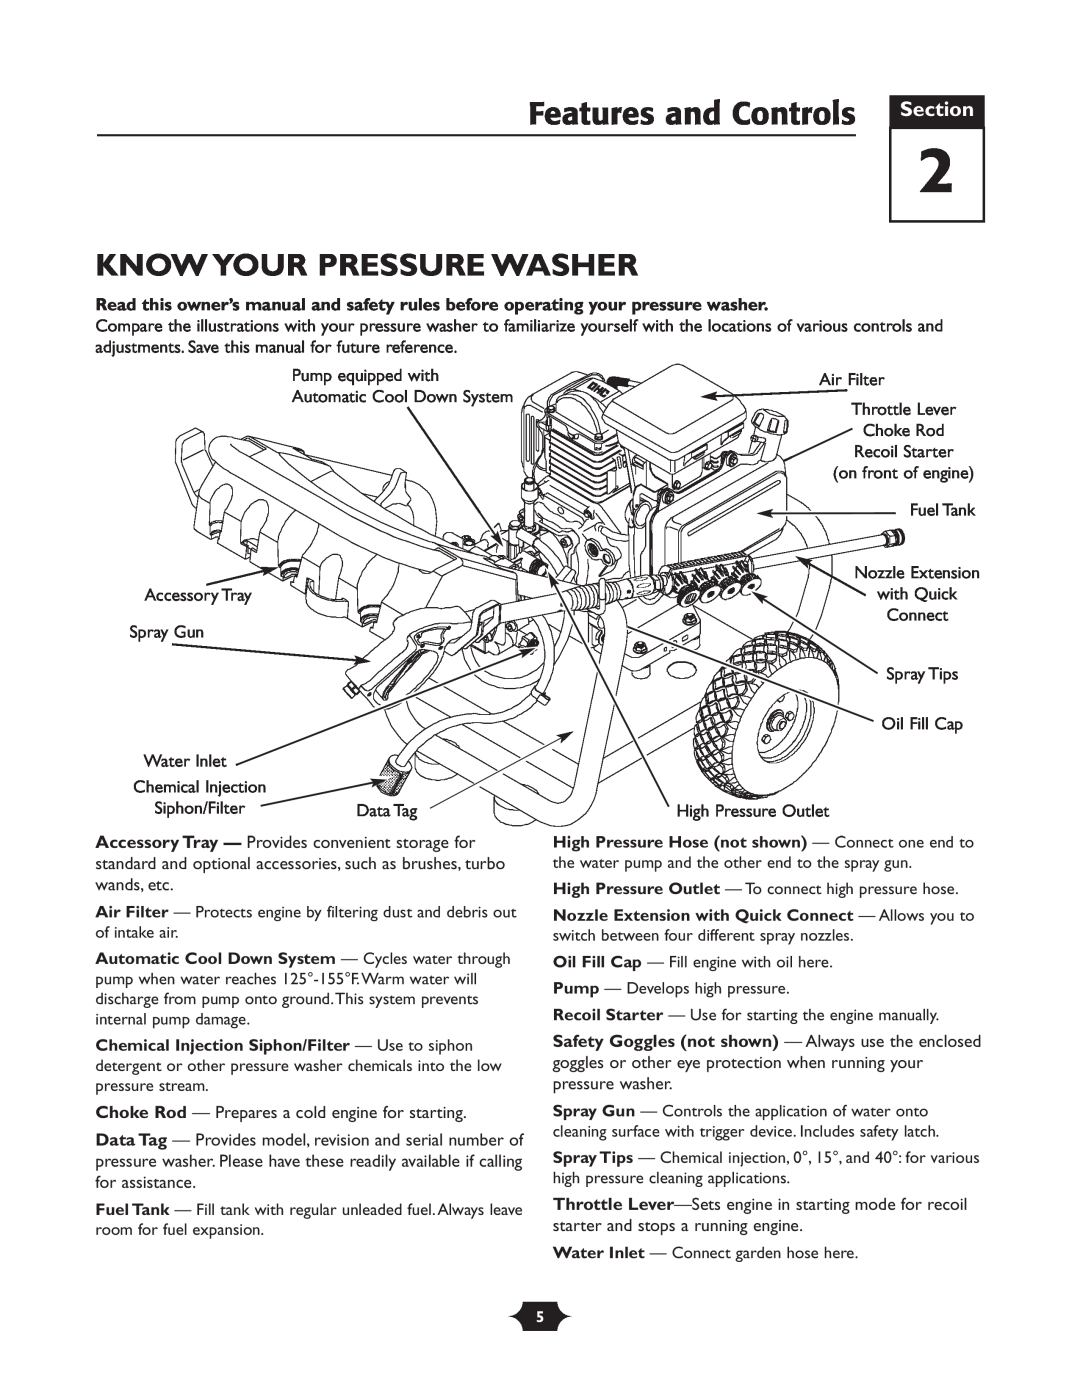 Briggs & Stratton 1903 owner manual Features and Controls Section, Know Your Pressure Washer 